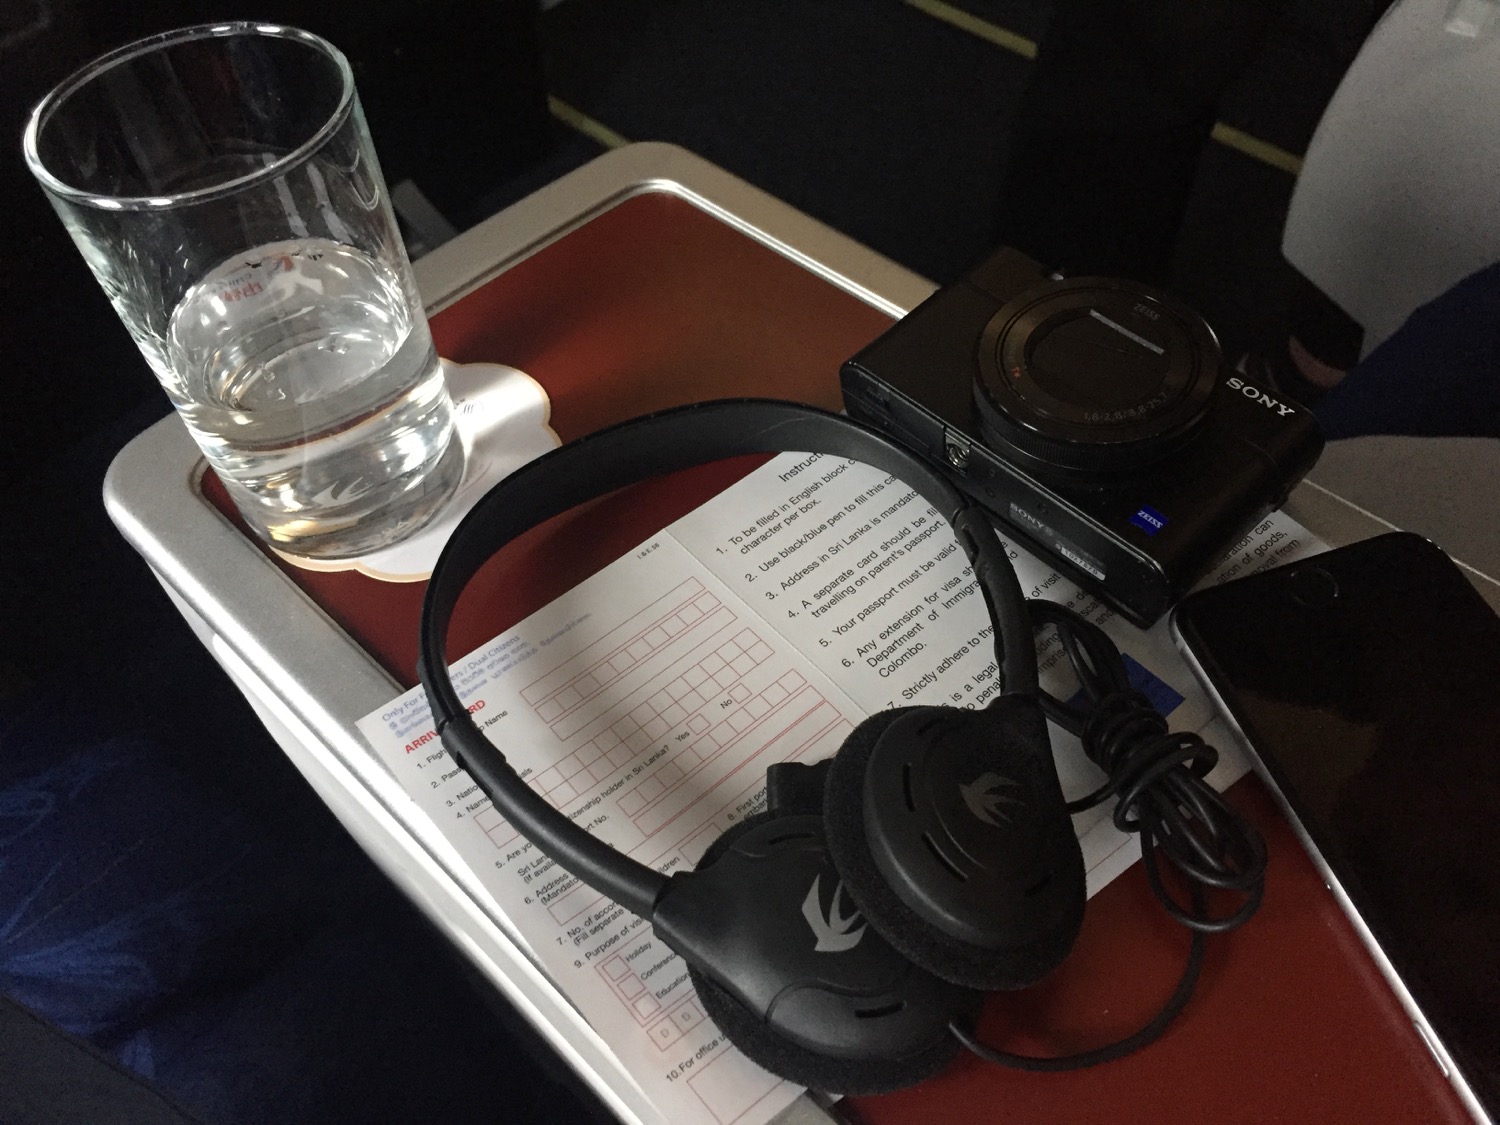 a black headphones and a glass of water on a tray